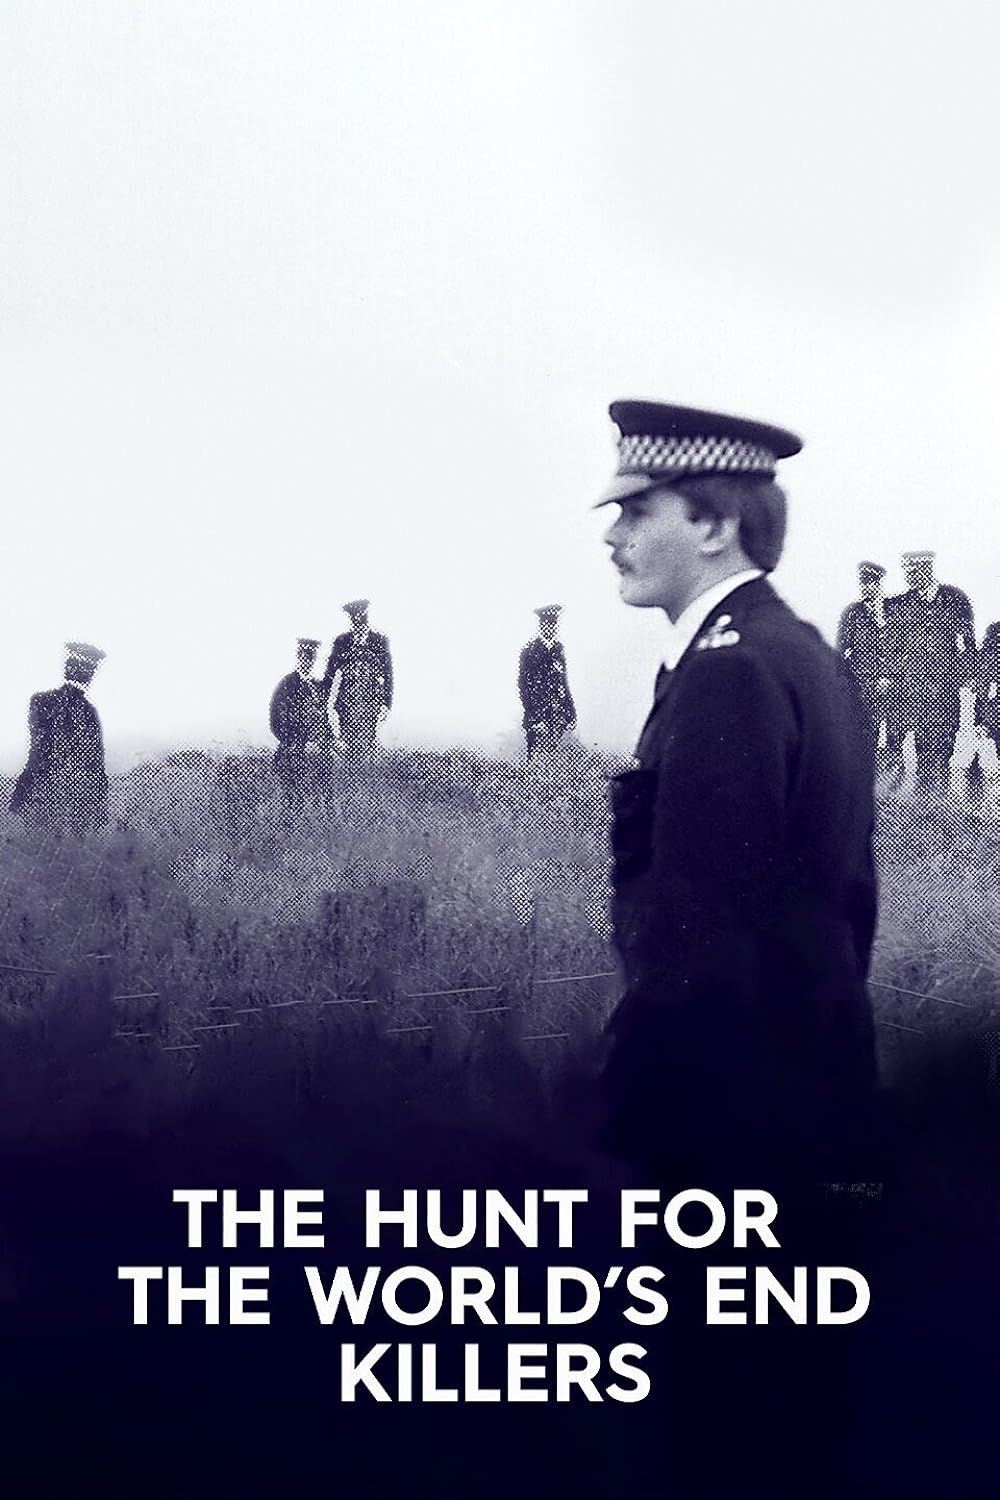 The Hunt for the World's End Killers